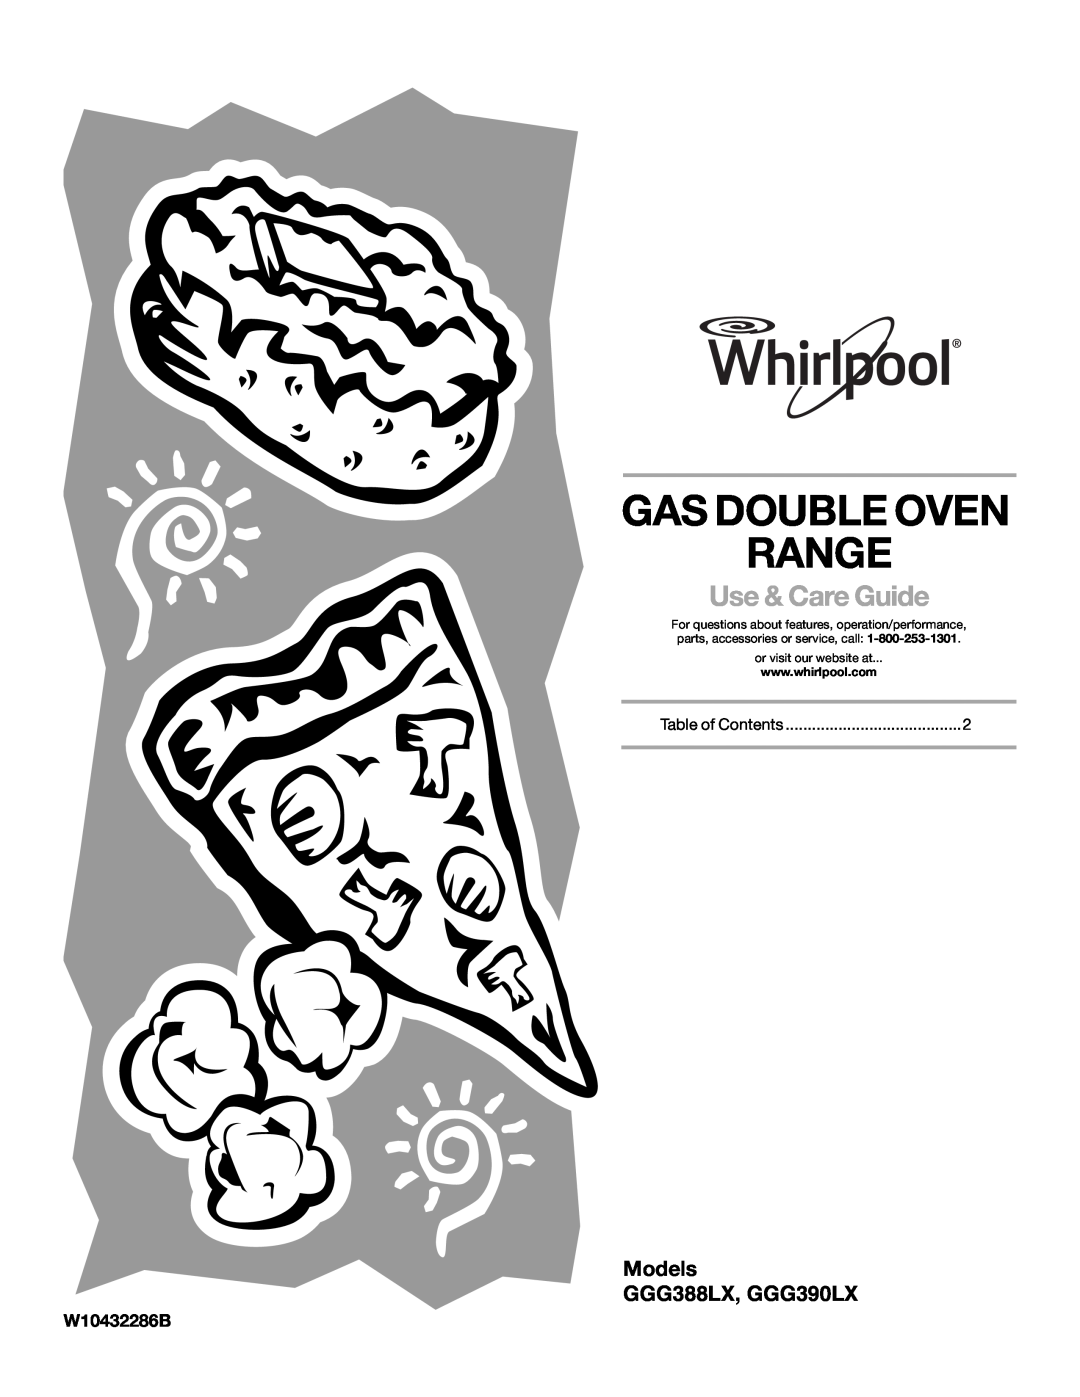 Whirlpool GGG388LX, GGG390LX manual Gas Double Oven Range, Use & Care Guide, Models, W10345647A, or visit our website at 